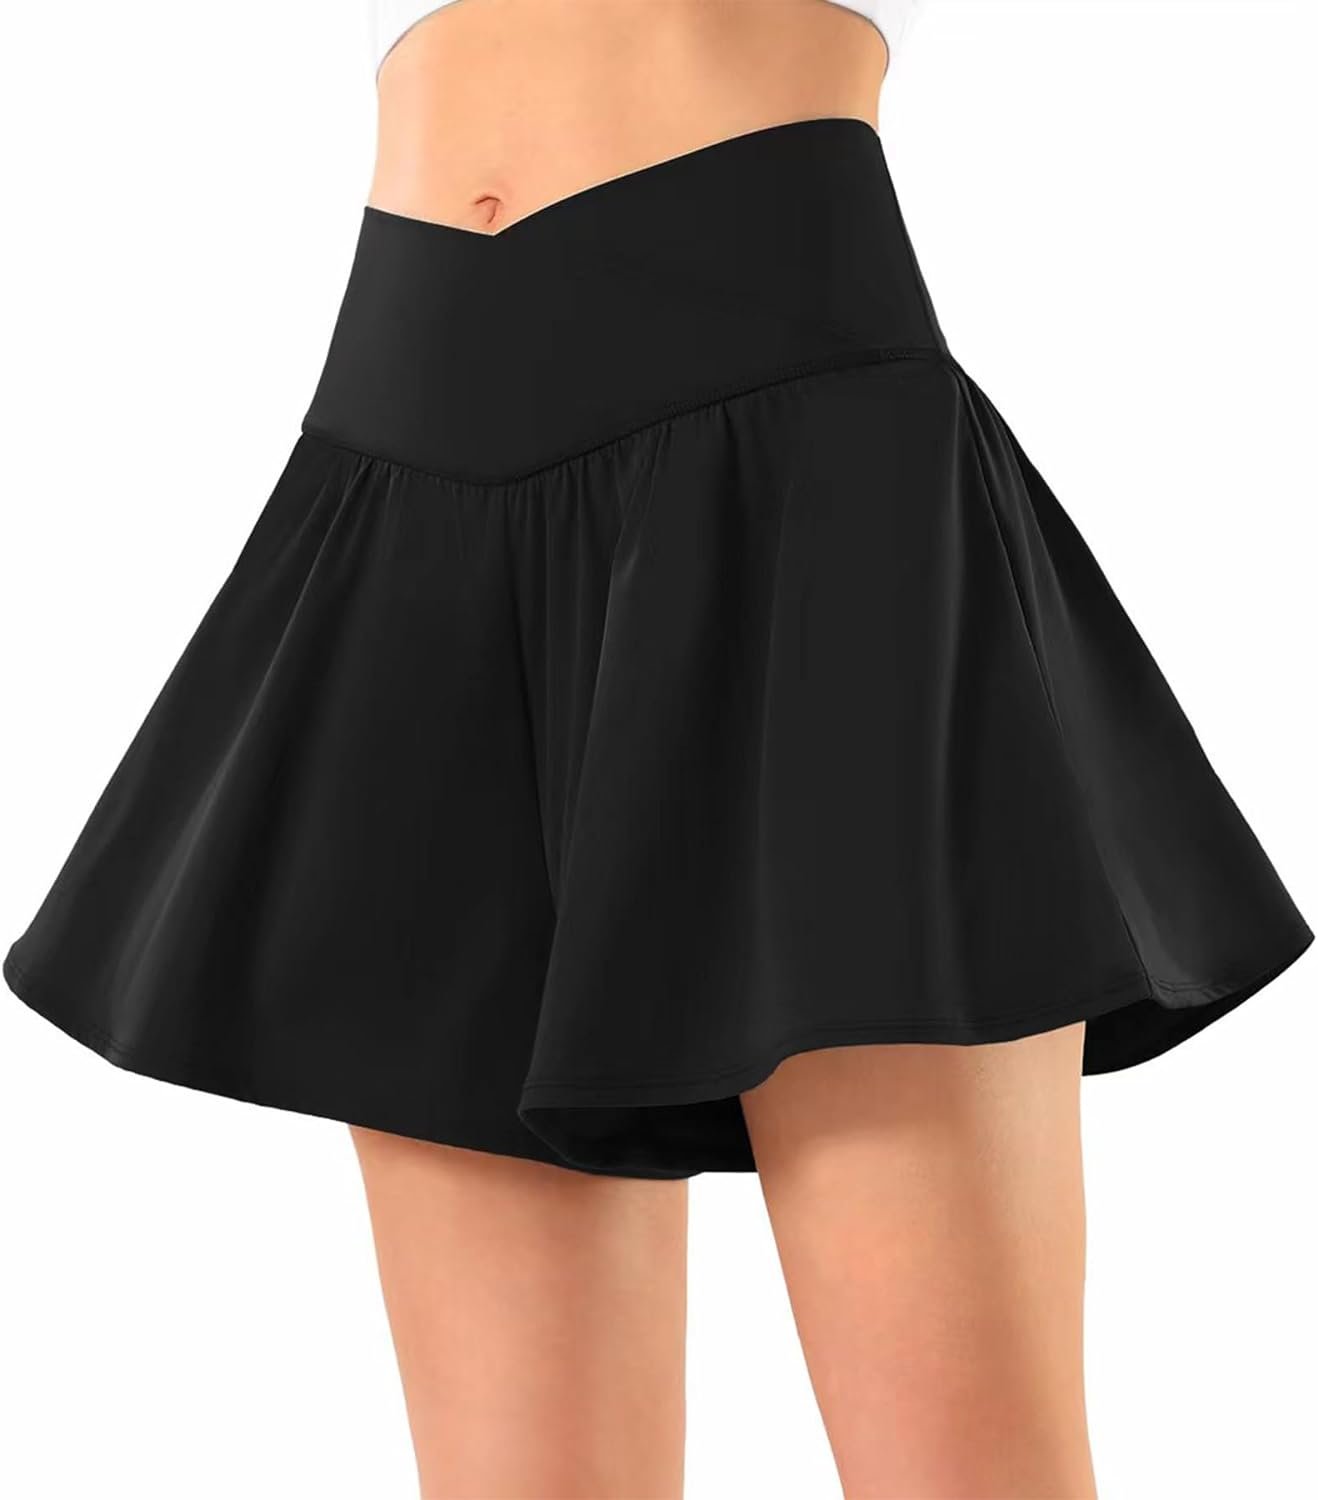 Tennis Skirt for Women with Pockets Shorts Flowy Athletic Shorts 2 in 1 Butterfly Running Shorts Pleated Golf Skirt Skort